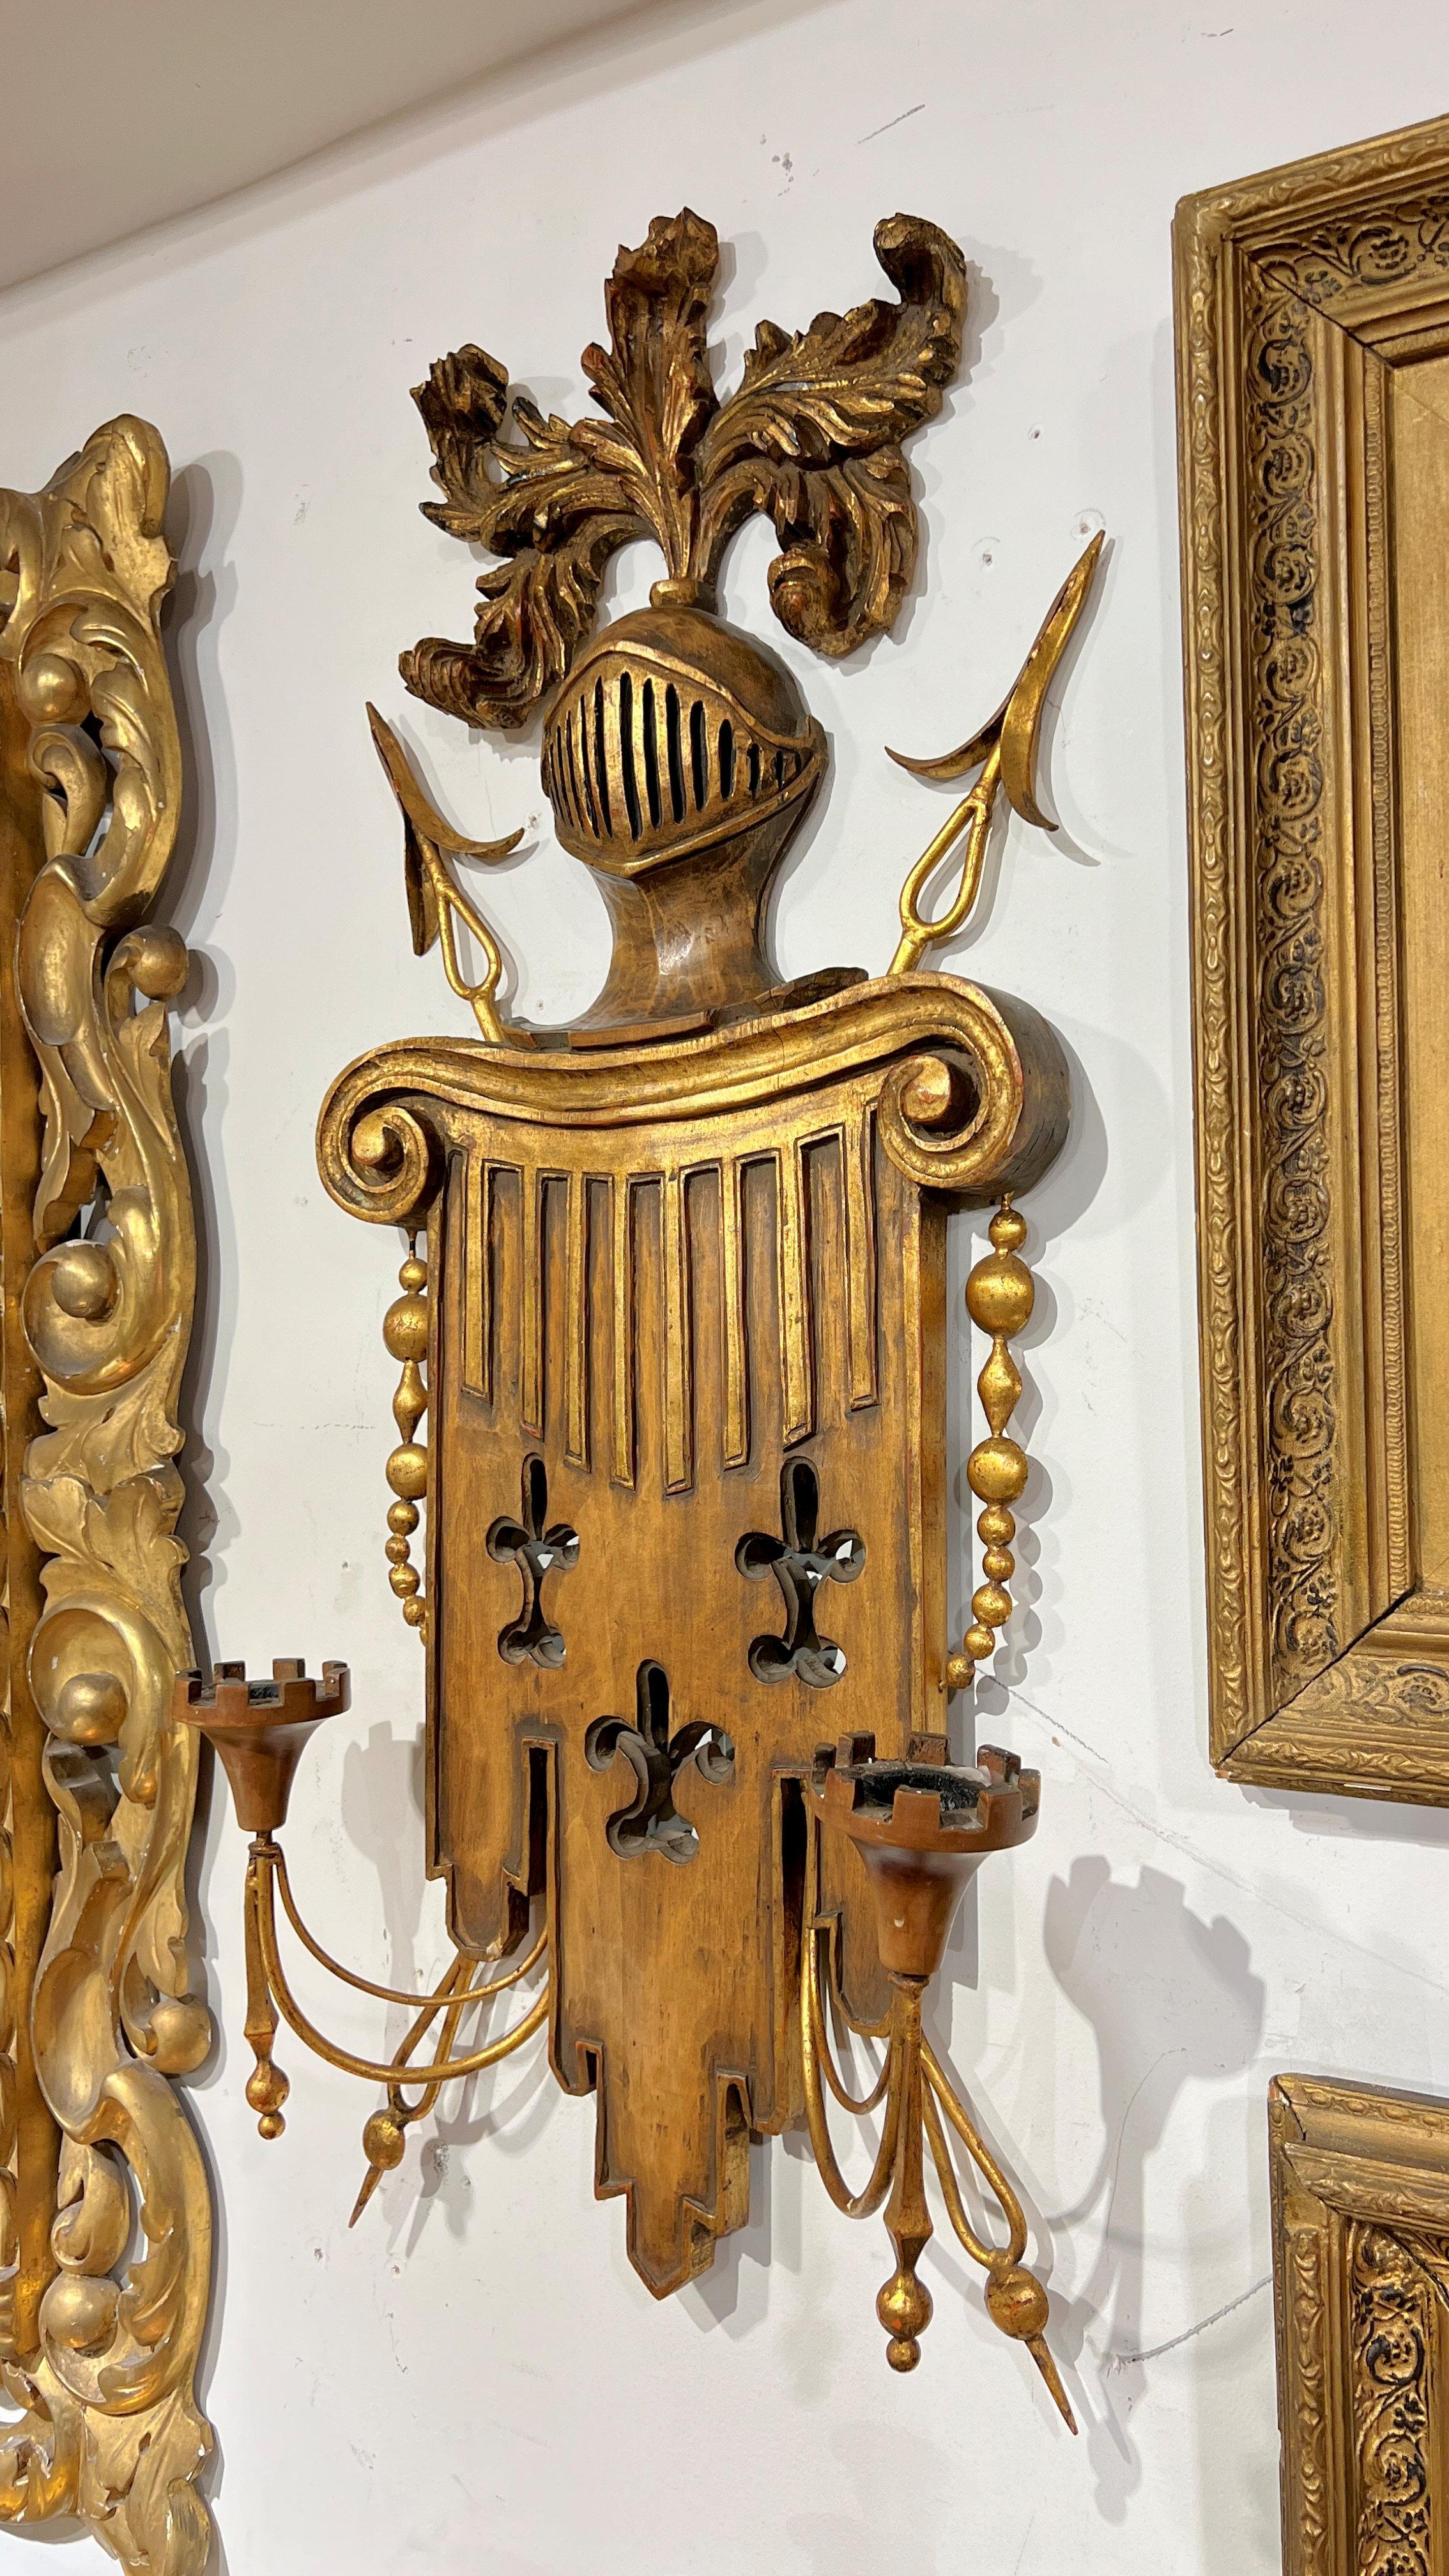 Pair of vintage carved and giltwood and metal sconces in the Gothic style featuring intricately carved backplates in the form of a column pierced with fleur-de-lis and Doric capital, surmounted by knight's helmet with feather plumes, sword tips and